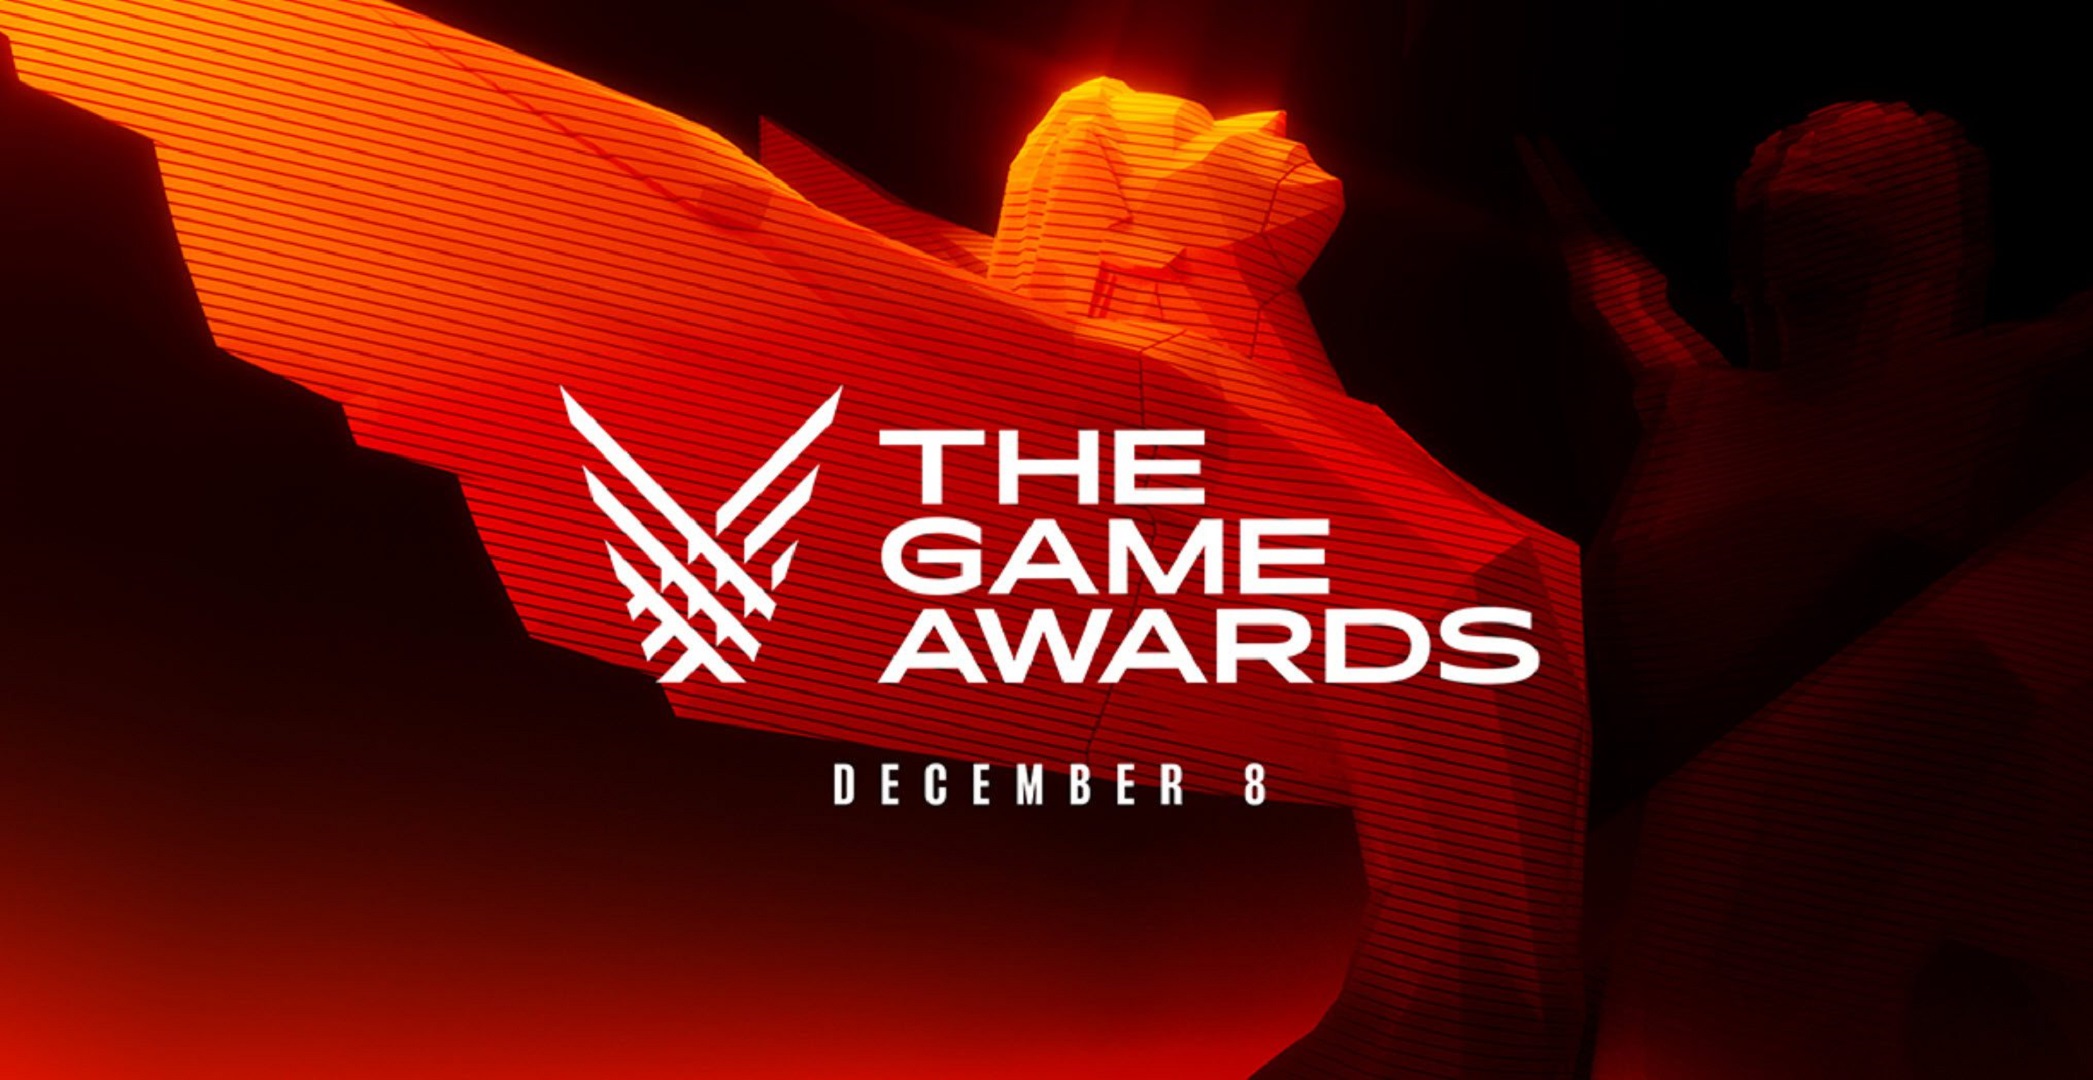 14 Nominated Games For 'The Game Awards' Are On Xbox Game Pass